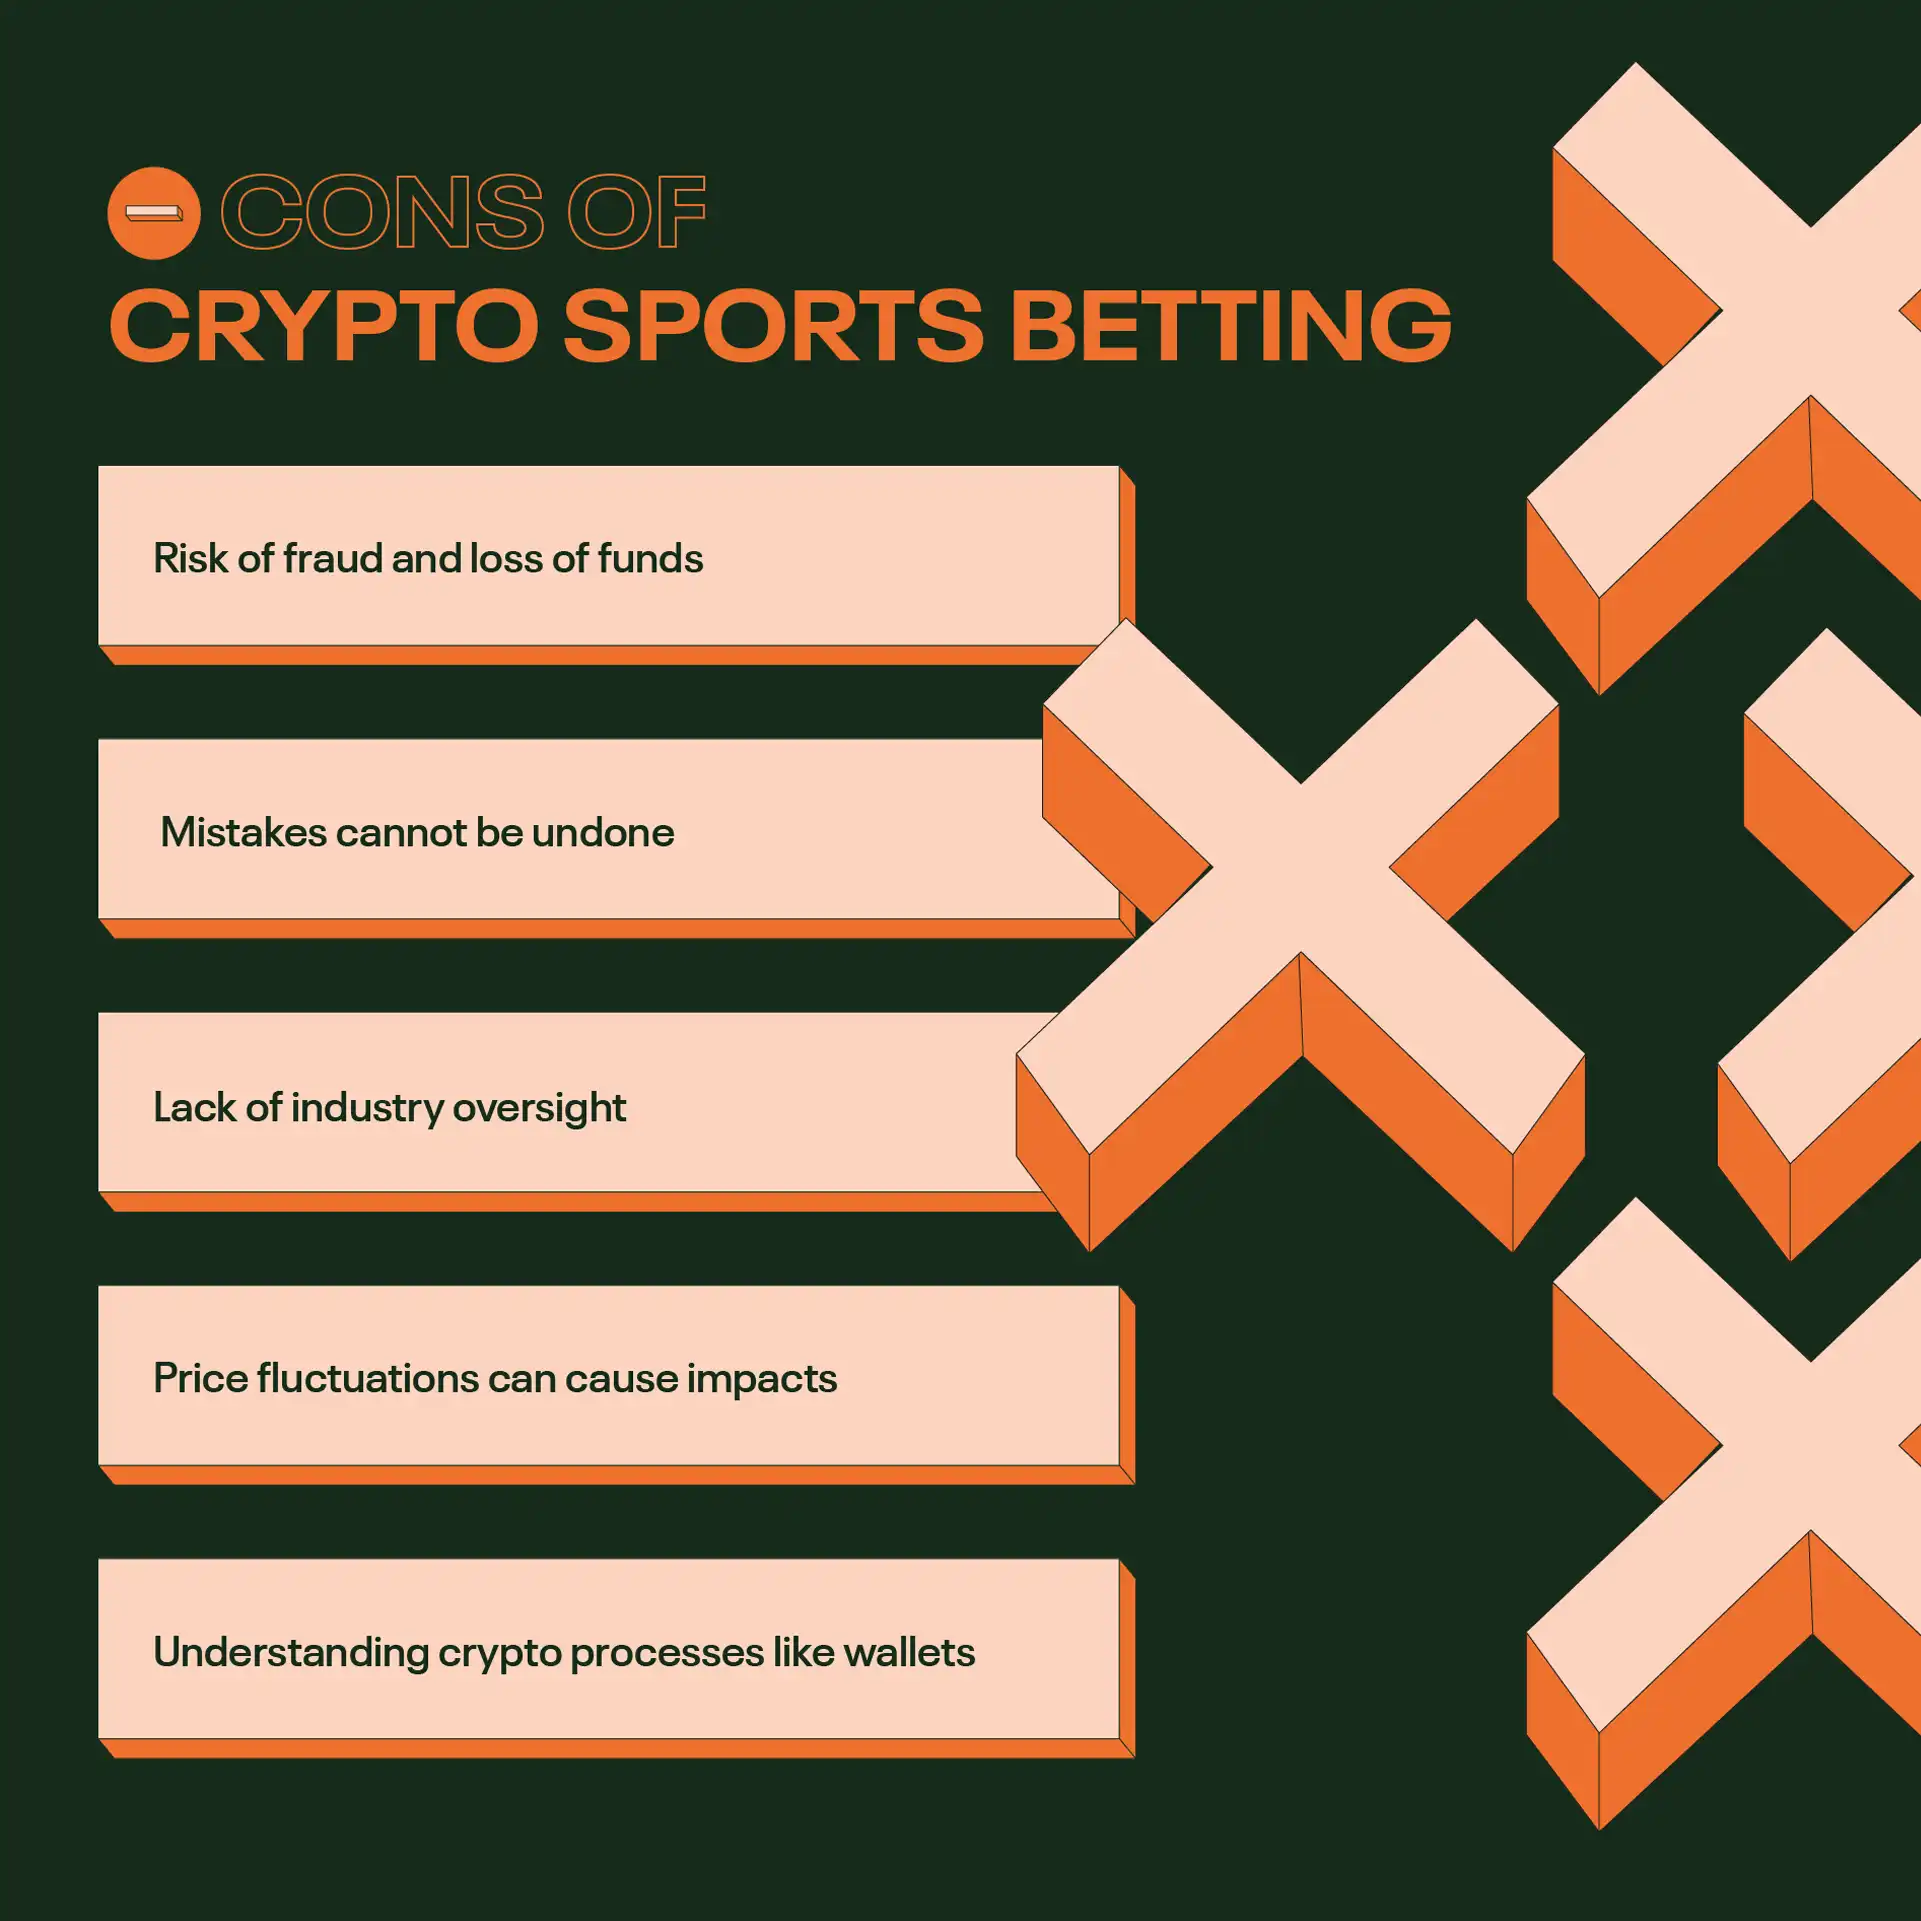 Crypto sports betting cons